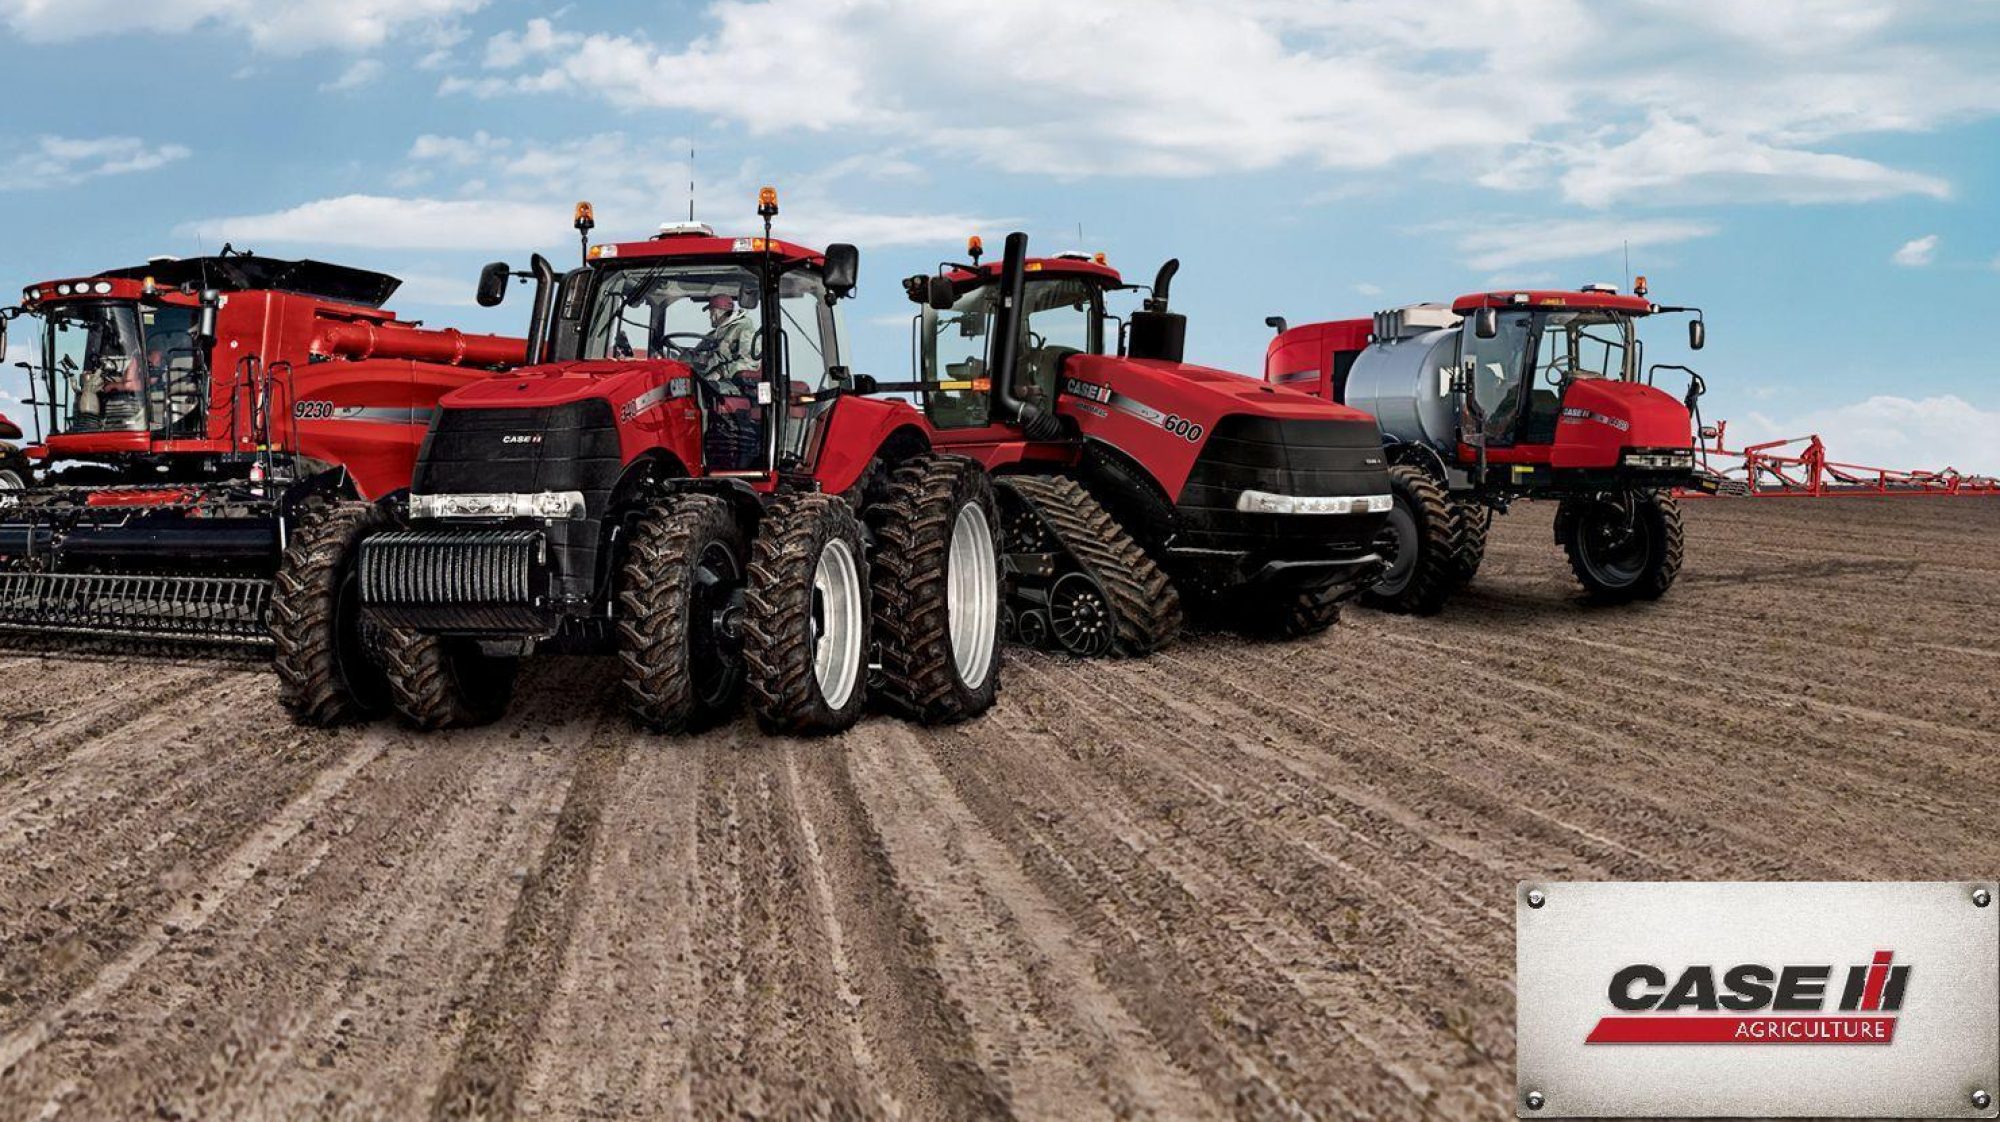 CASE IH /"1394/" Tractor Operator Instruction Manual